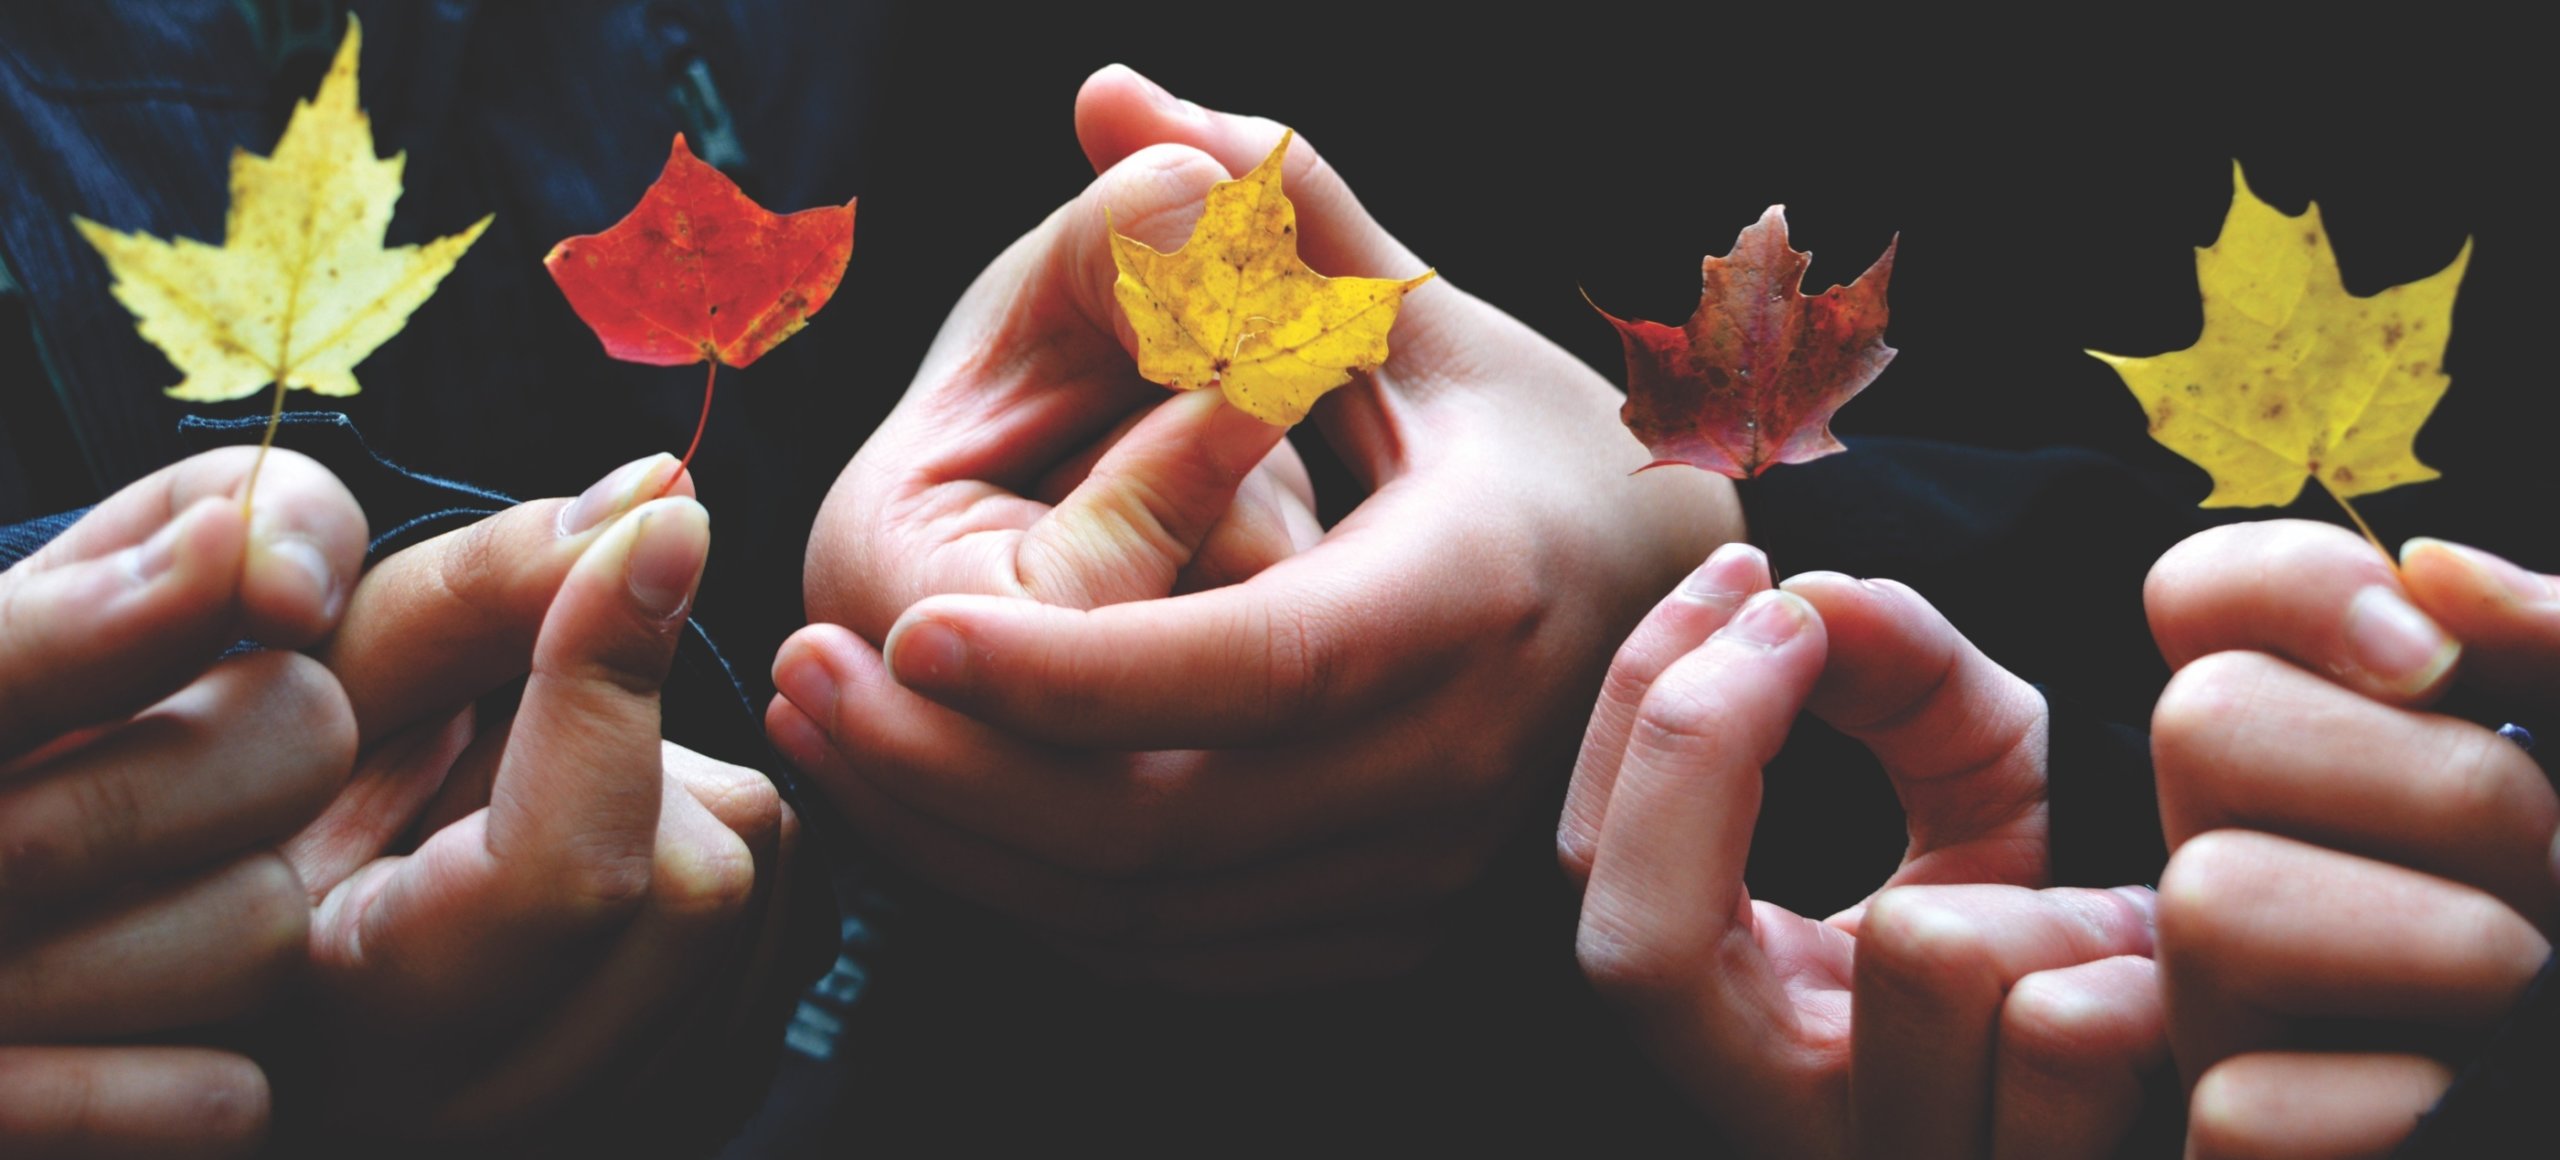 A close up of five hands each holding a small red or yellow leaf.